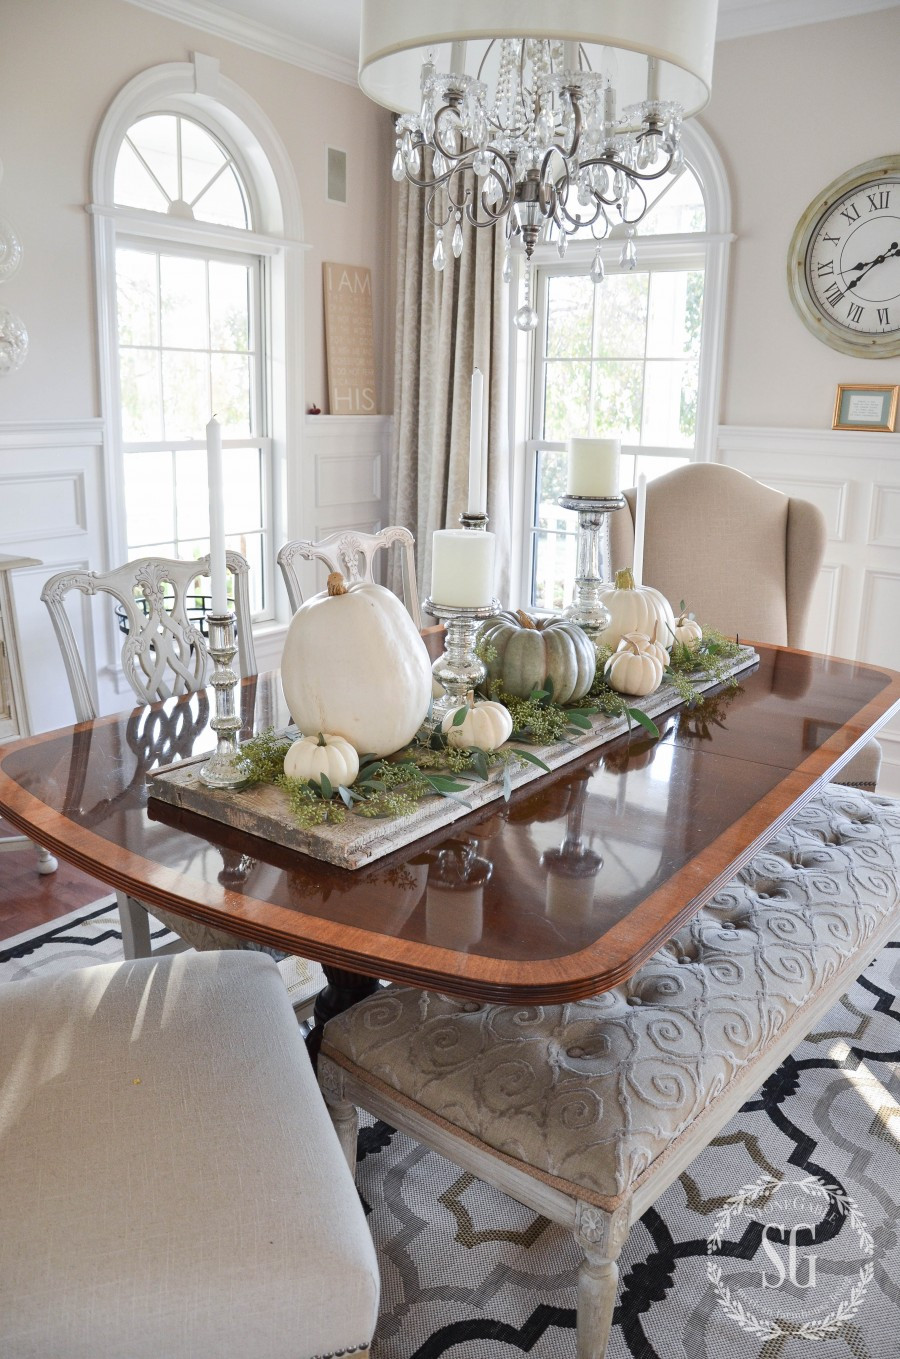 Living Room Table Centerpiece
 EASY PUMPKIN THANKSGIVING TABLE